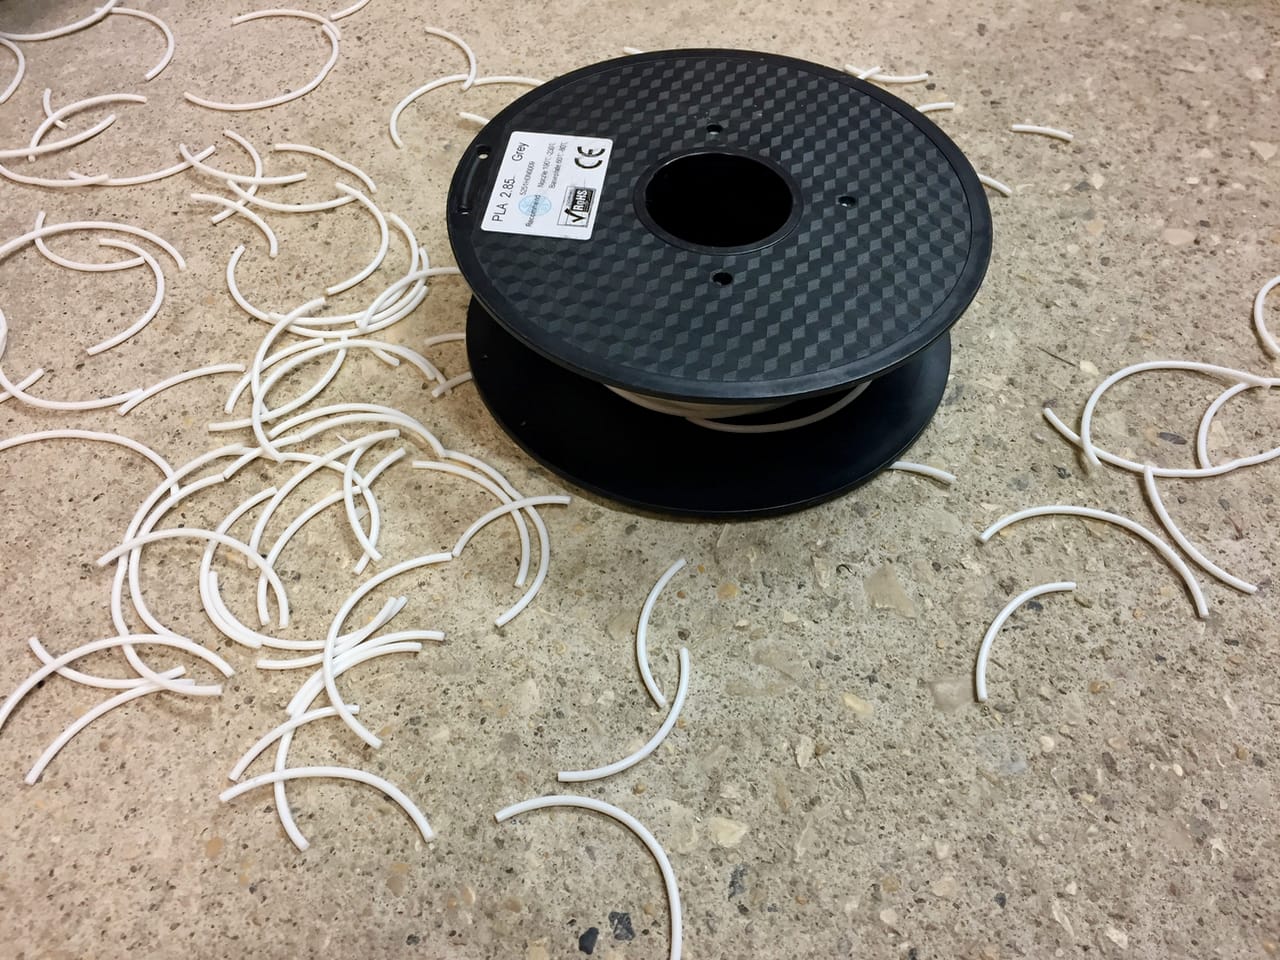  What happens to poorly maintained 3D printer filament 